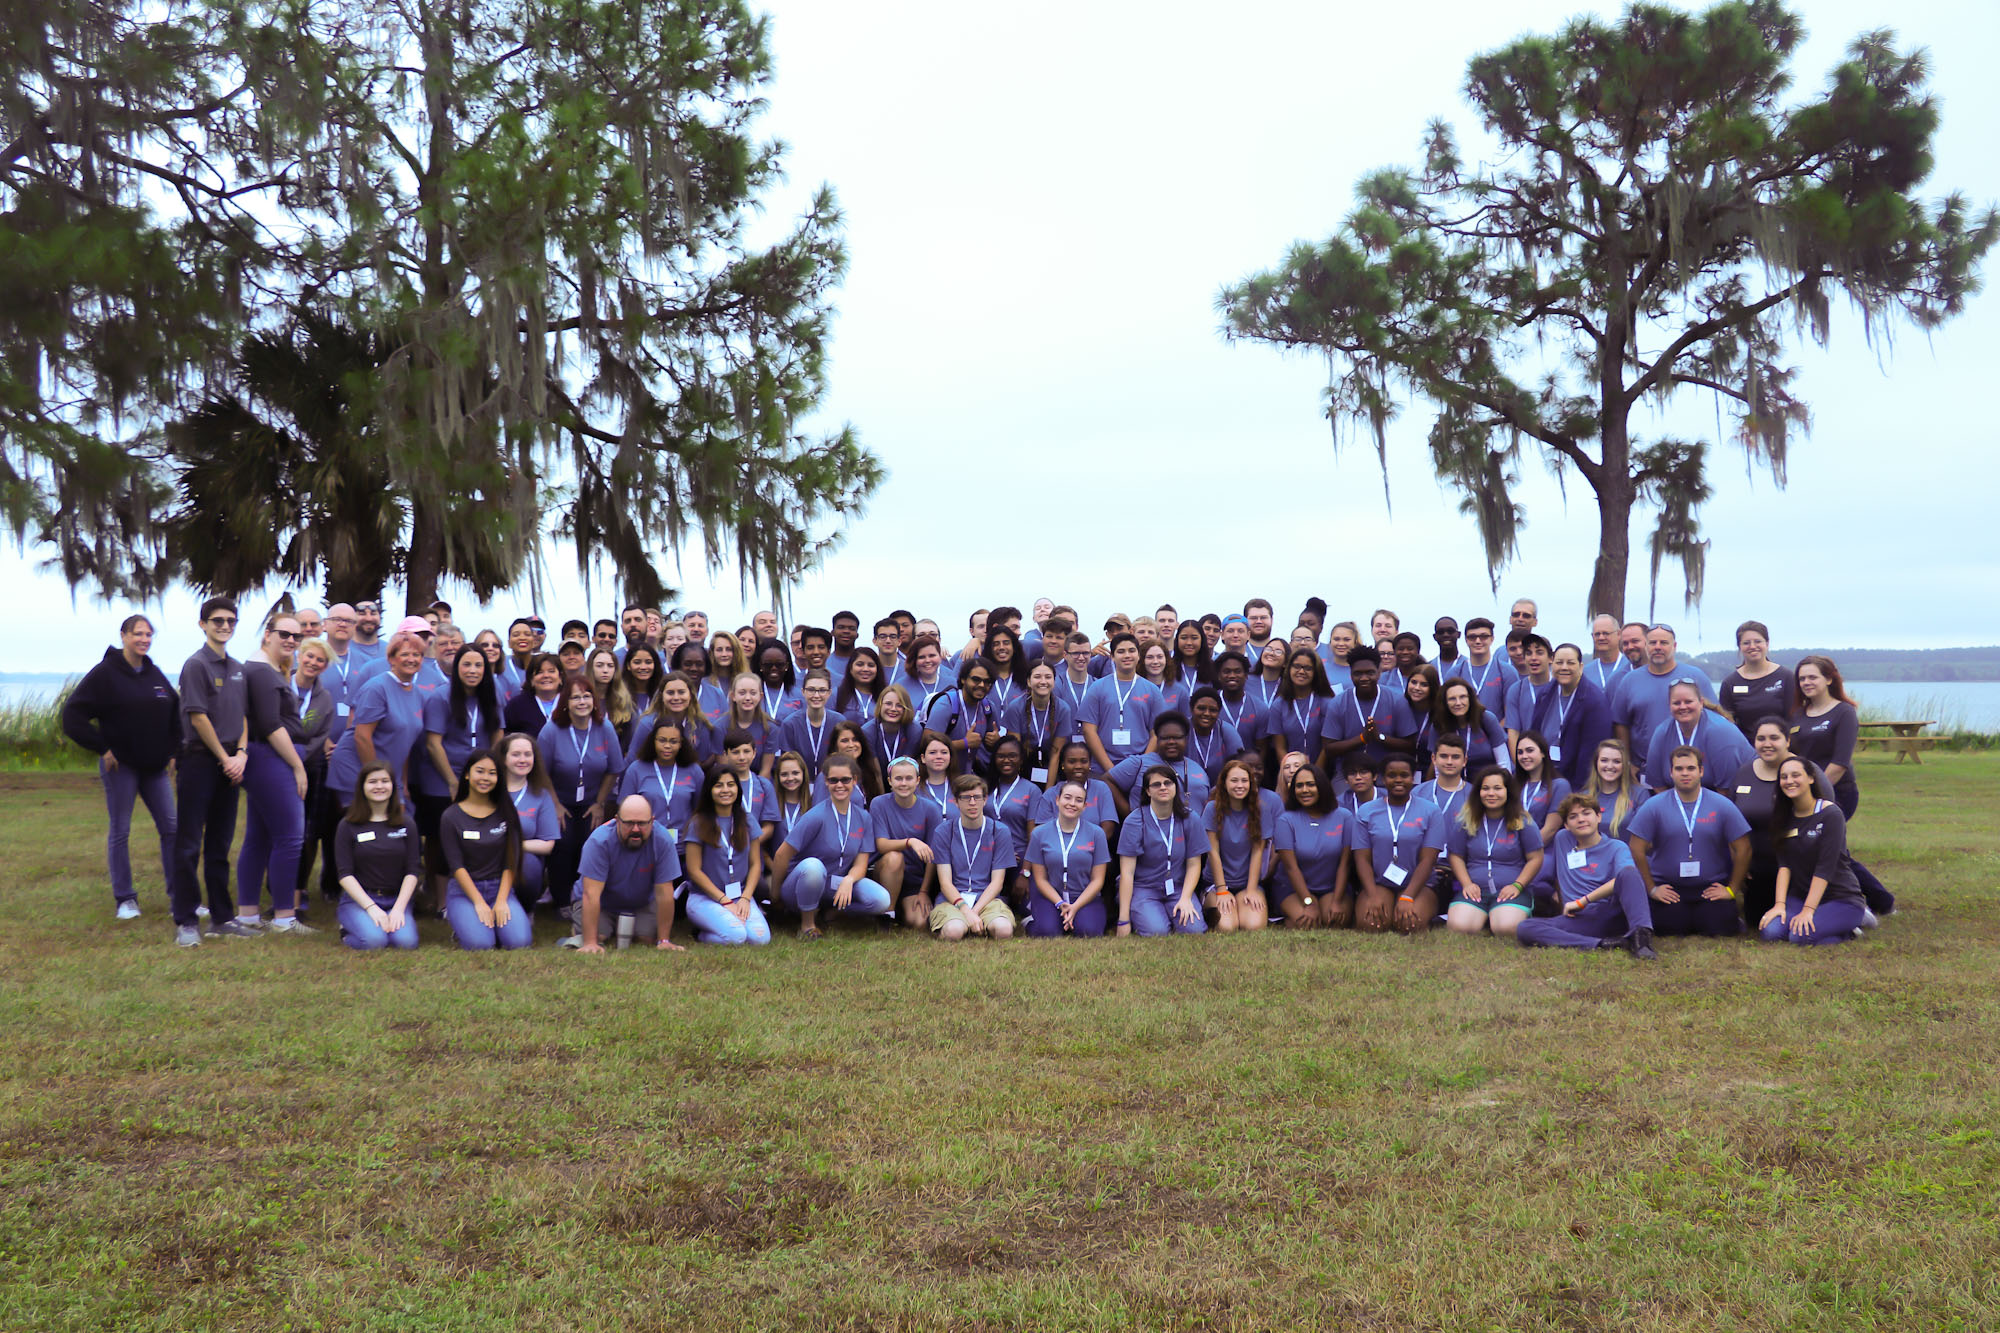 Large group of SkillsUSA Florida members posing in front of a body of water at a leadership conference